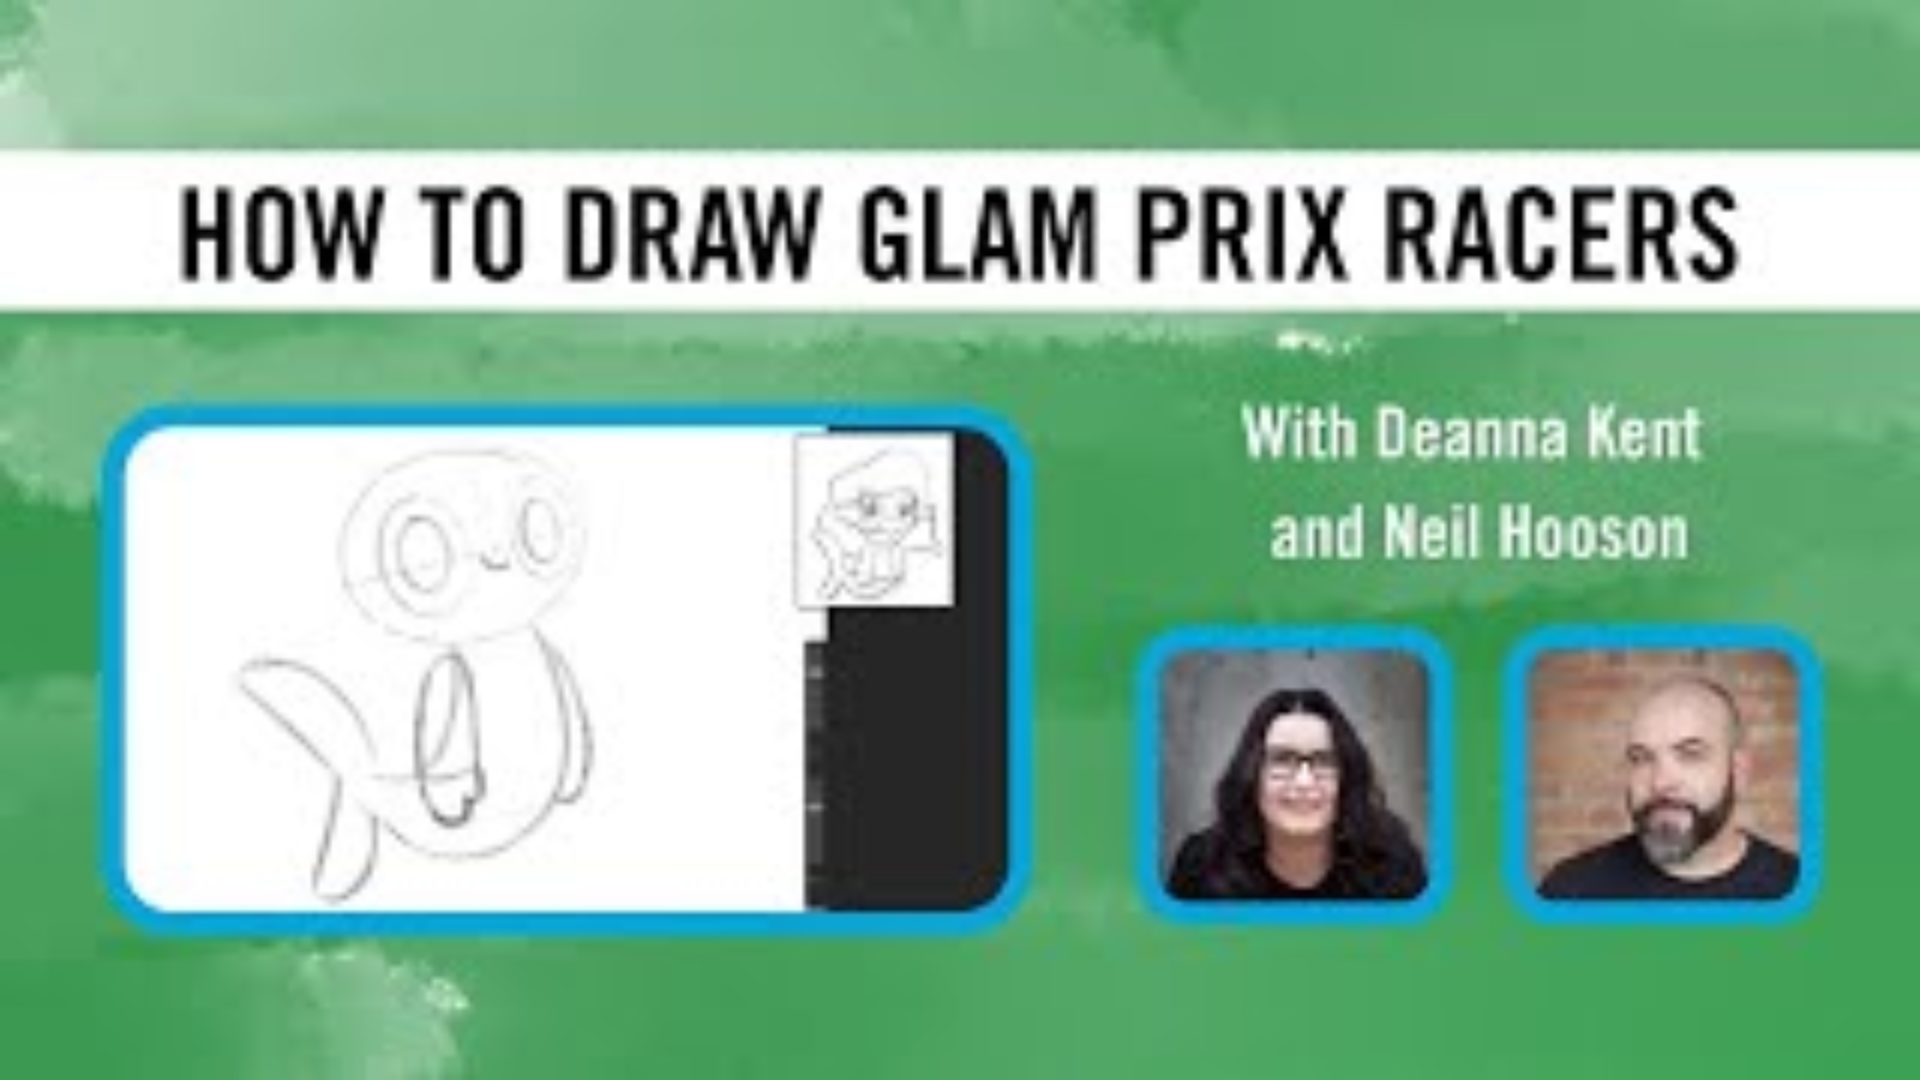 How to Draw Glam Prix Racers